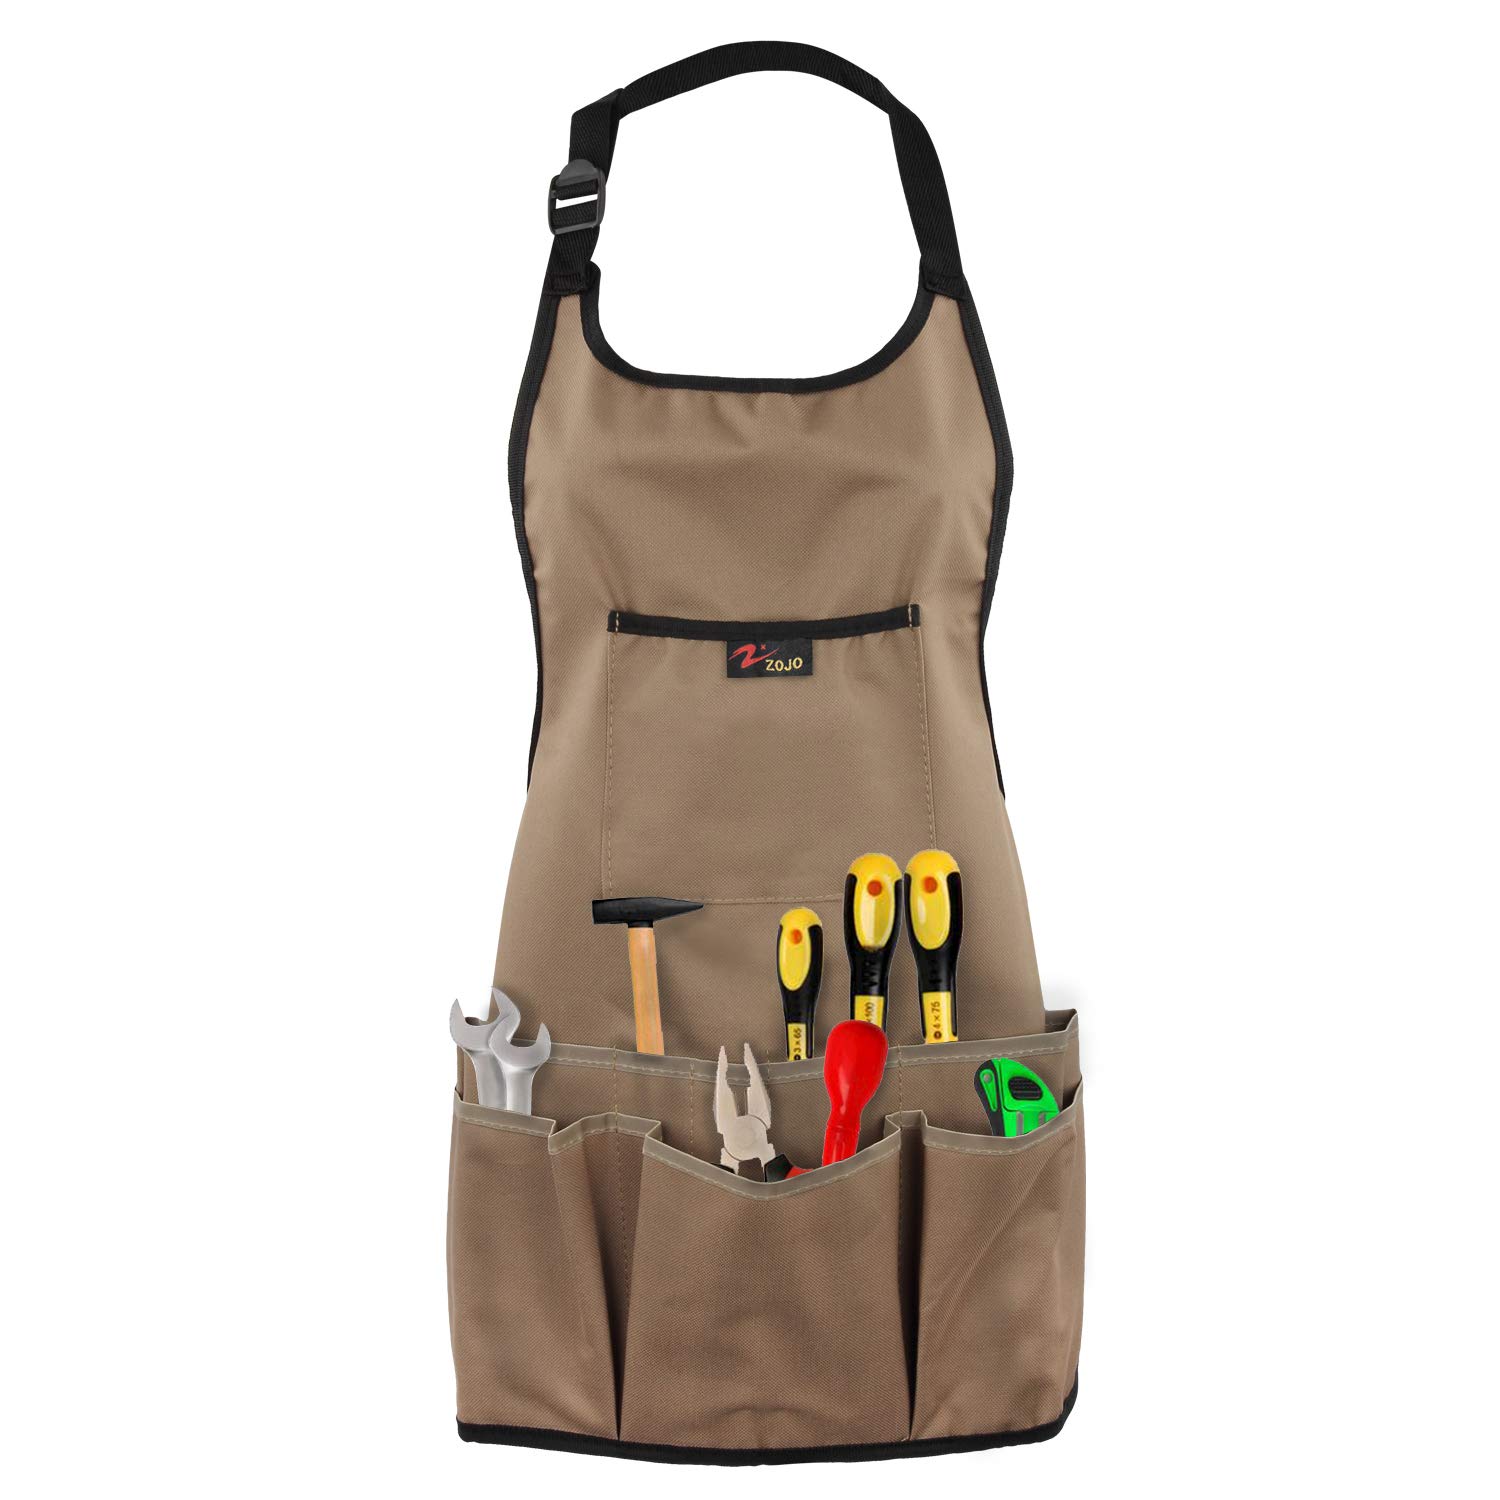 Oxford Cloth Men Women Wear-resistant Garden Tools Aprons with Pockets